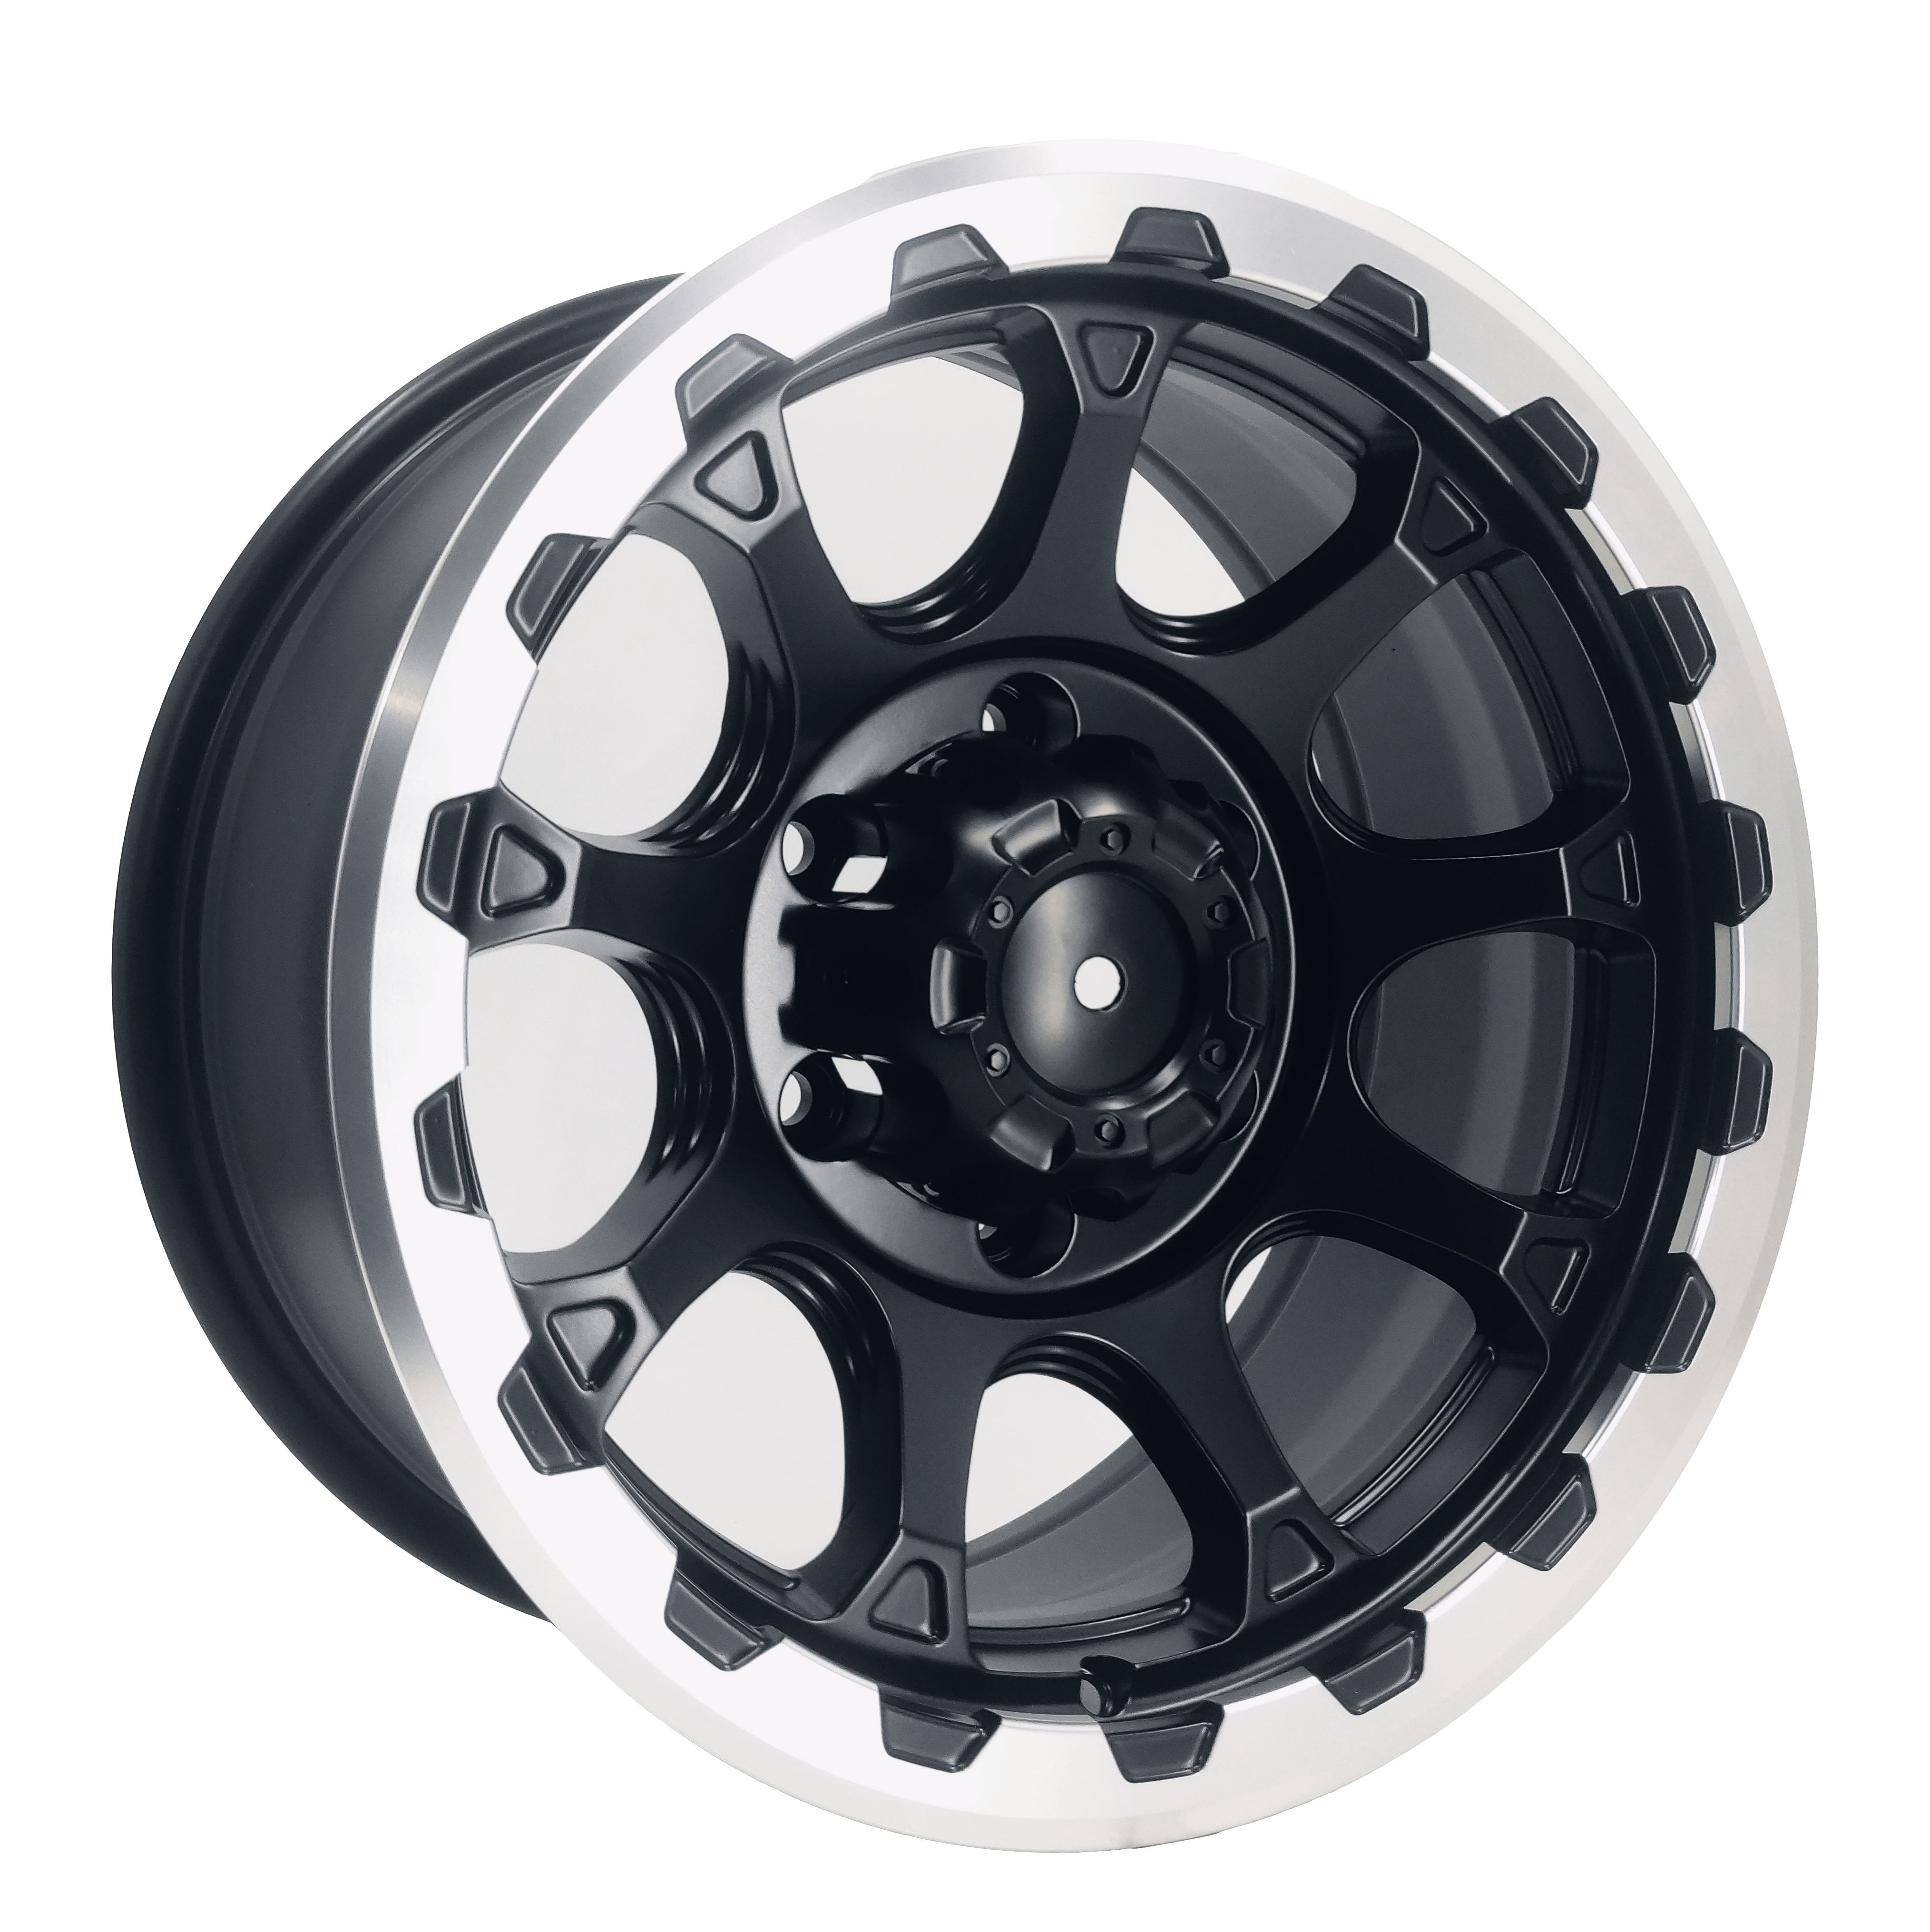 China Cheap price Toyota Wheels - Rayone Wheels 4×4 Off-Road 16×8.0 17×9.0 Car Alloy Wheels For Jeep And SUV – Rayone